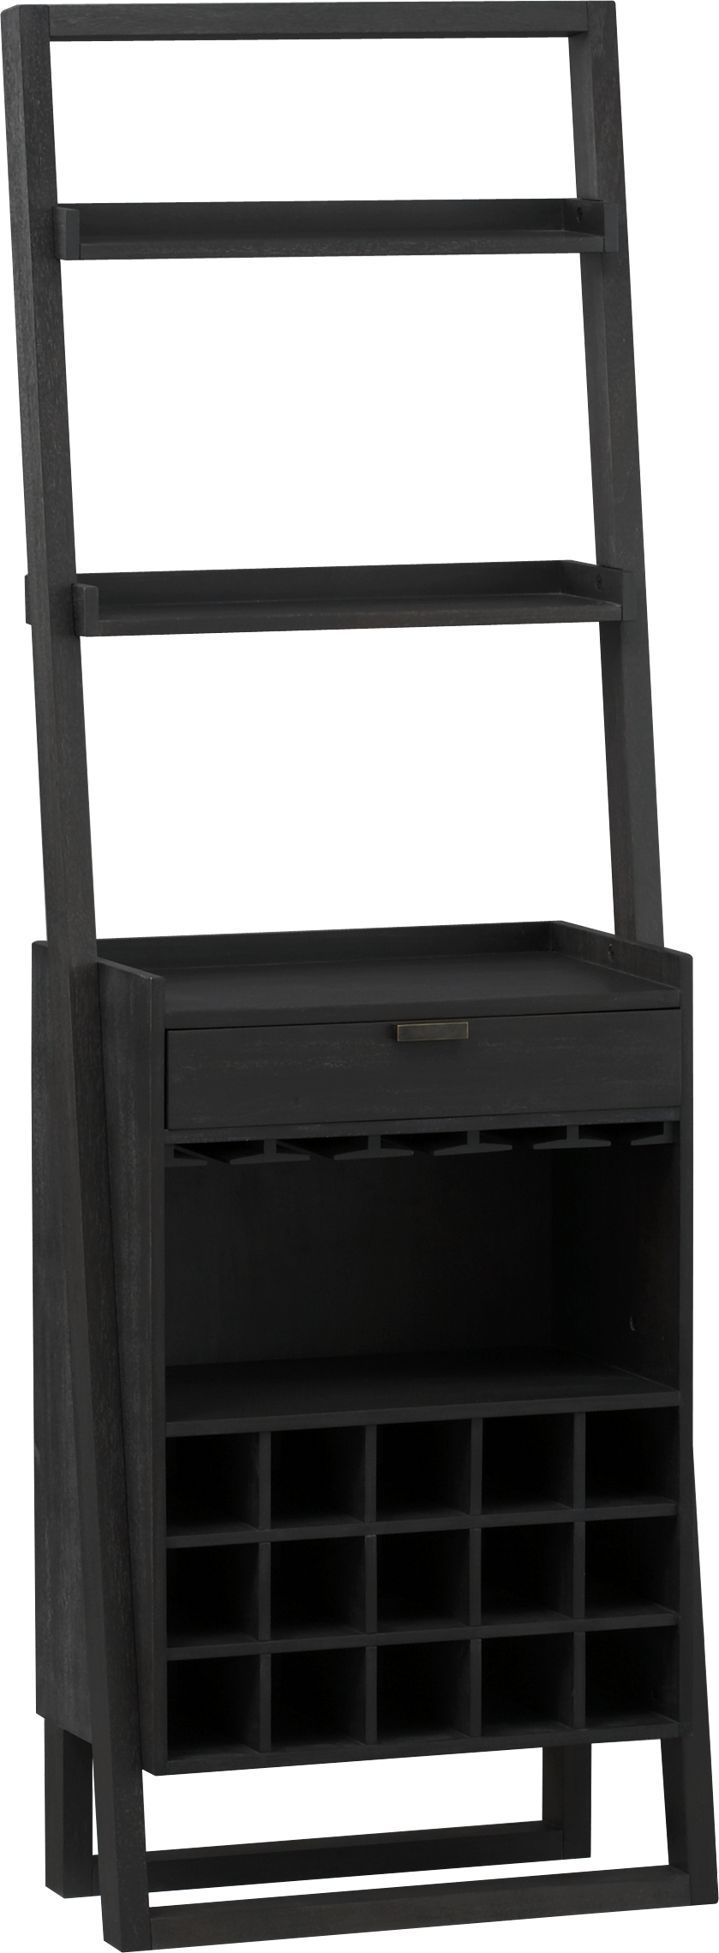 Sloane Grey Leaning Wine Bar Crate And Barrel A Great with regard to dimensions 719 X 1953